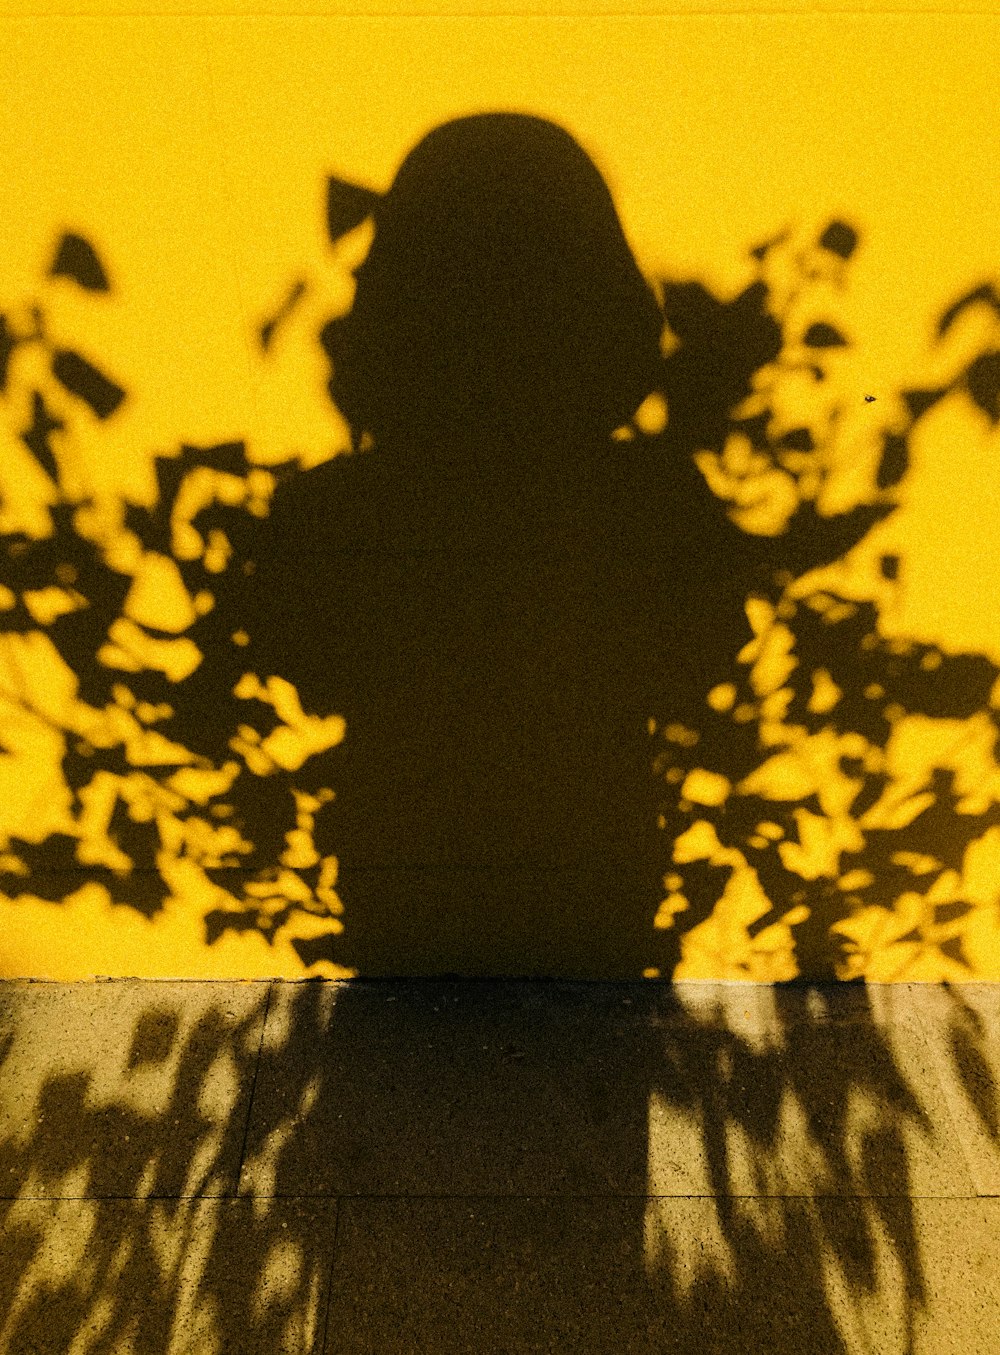 silhouette of sitting person